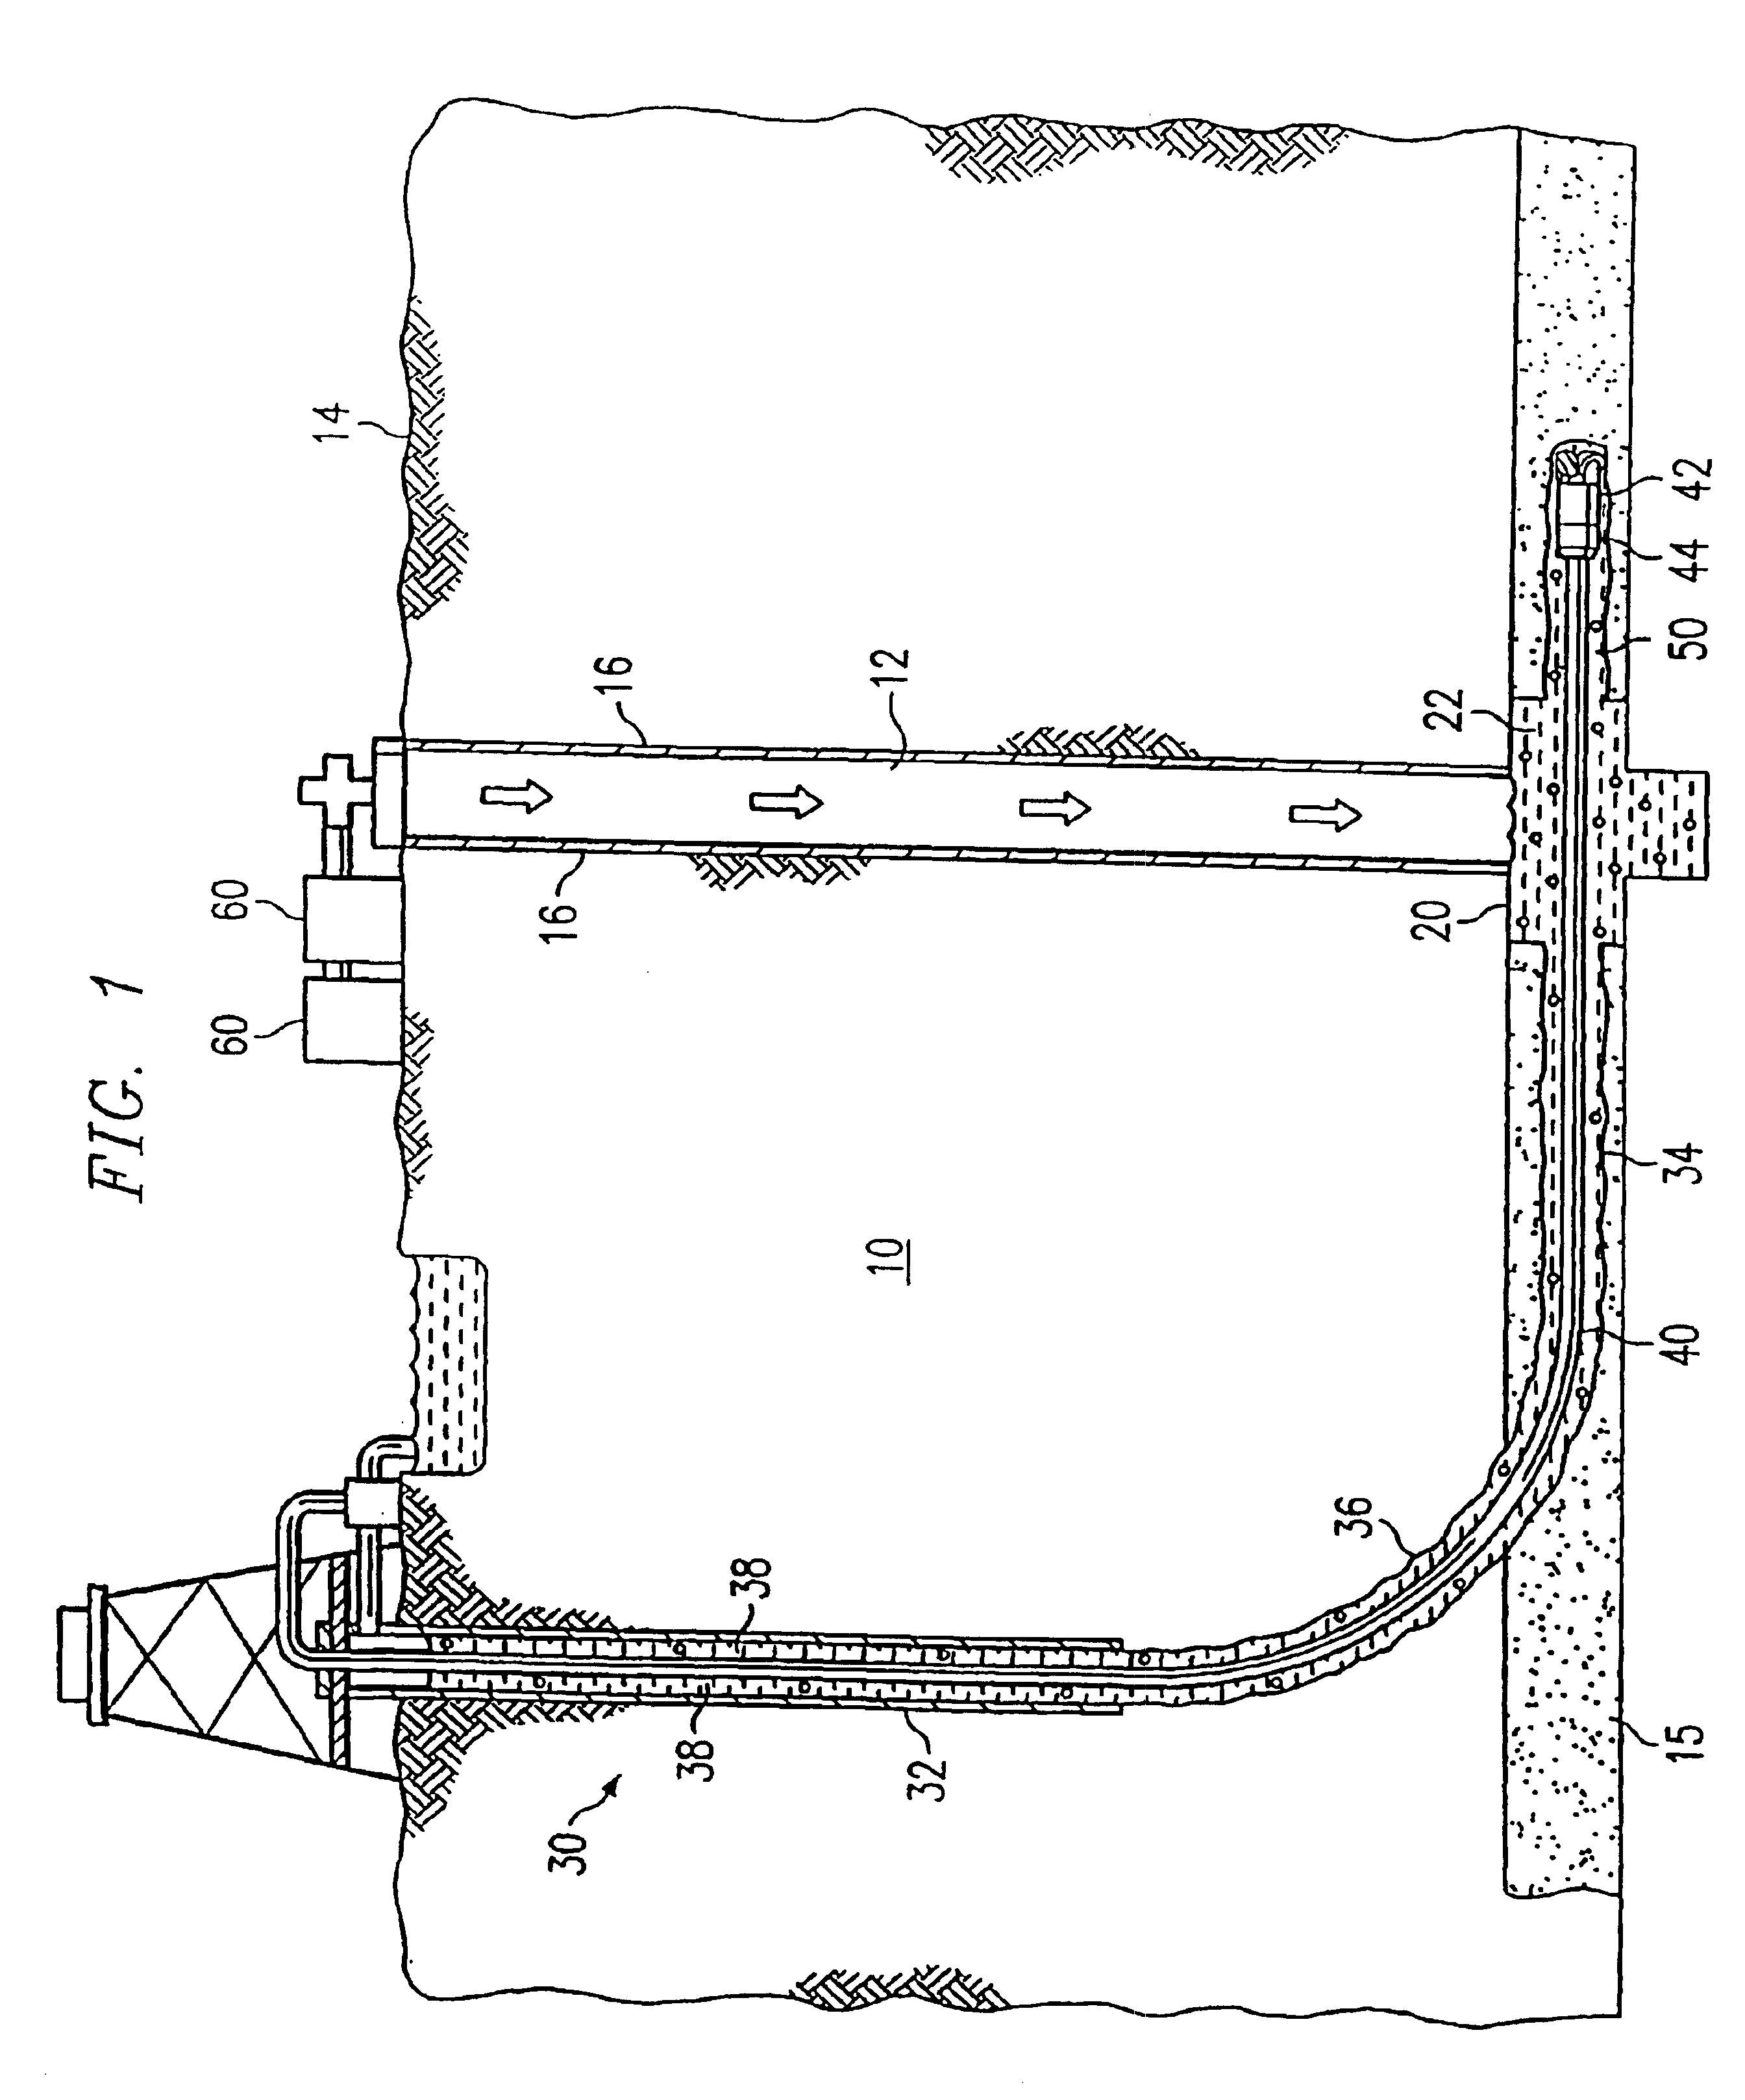 Method and system for accessing subterranean deposits from the surface